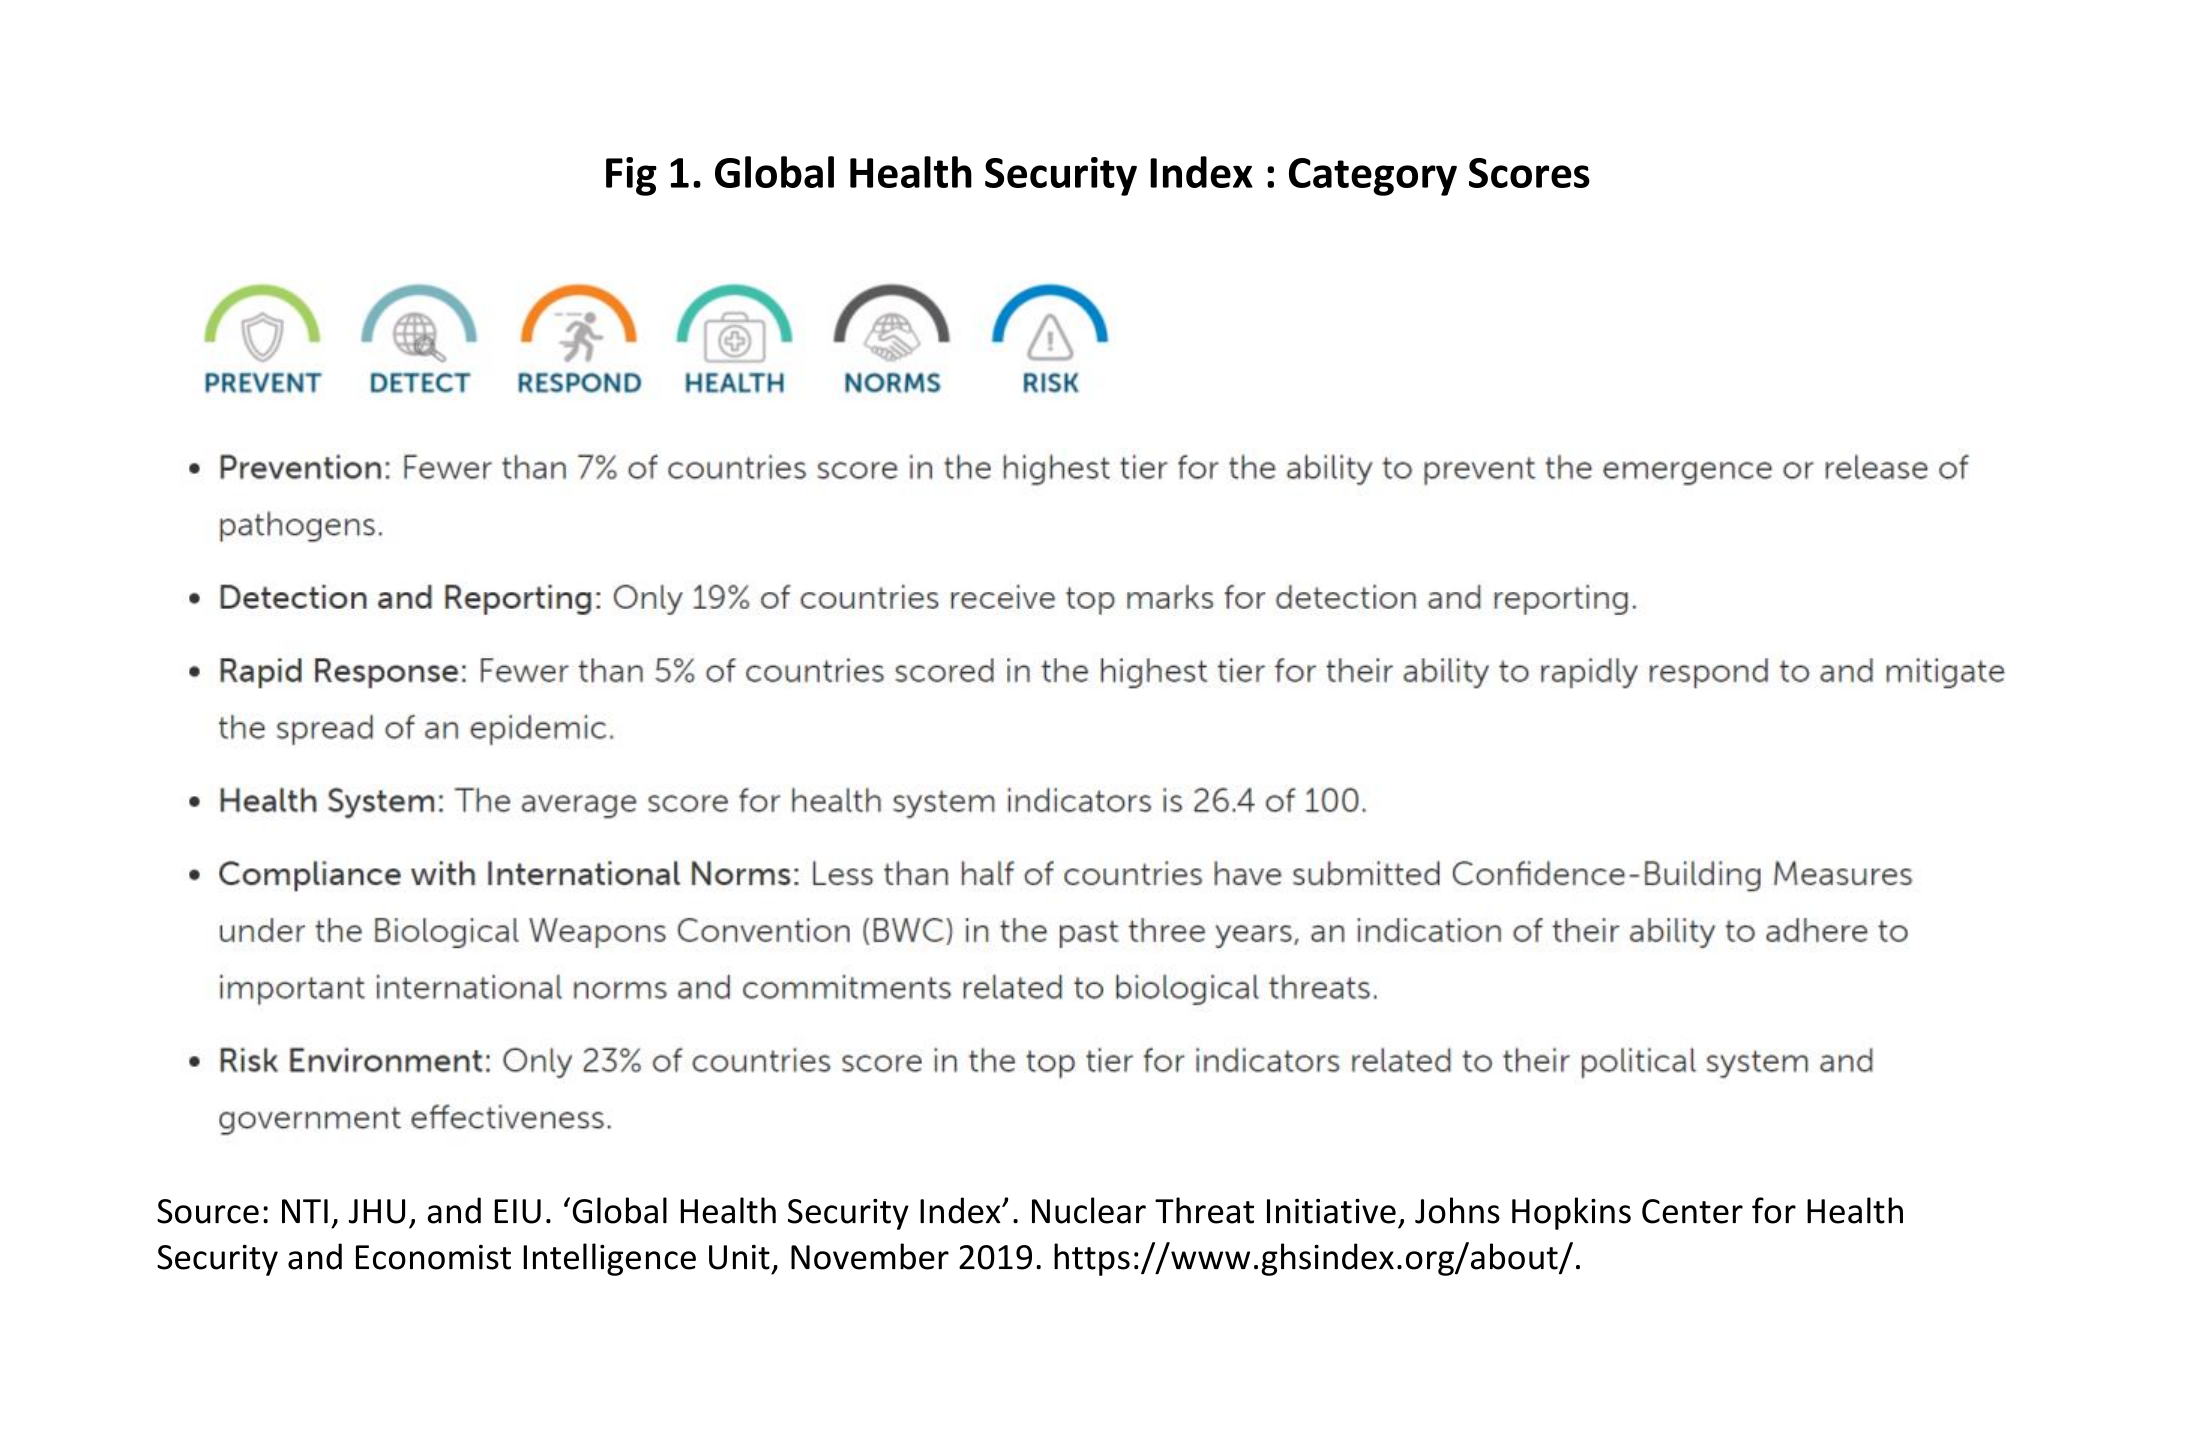 Global Health Security Index: Category Scores